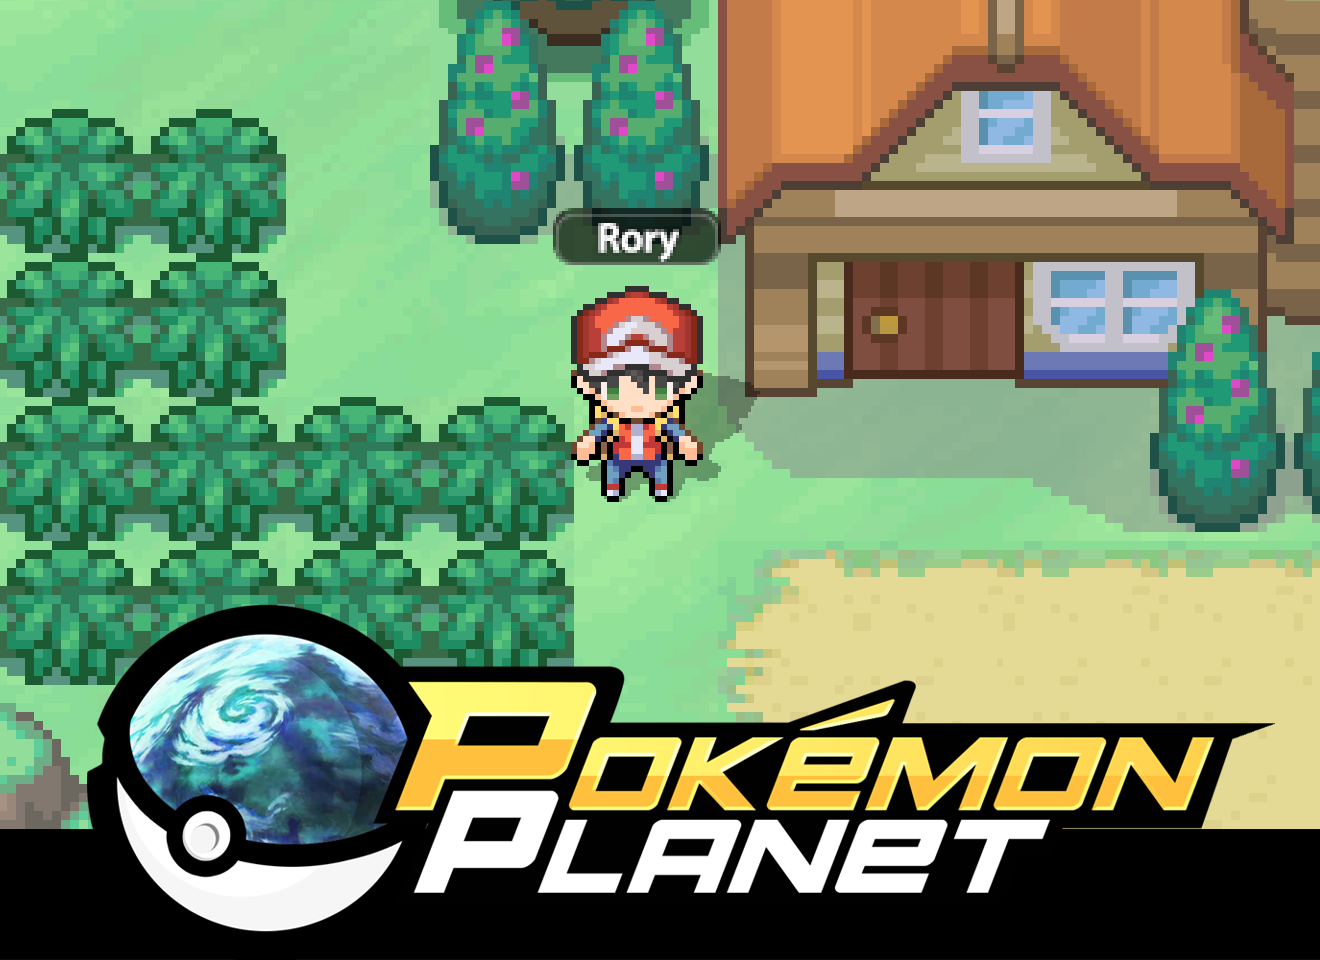 pokemon game download for mac